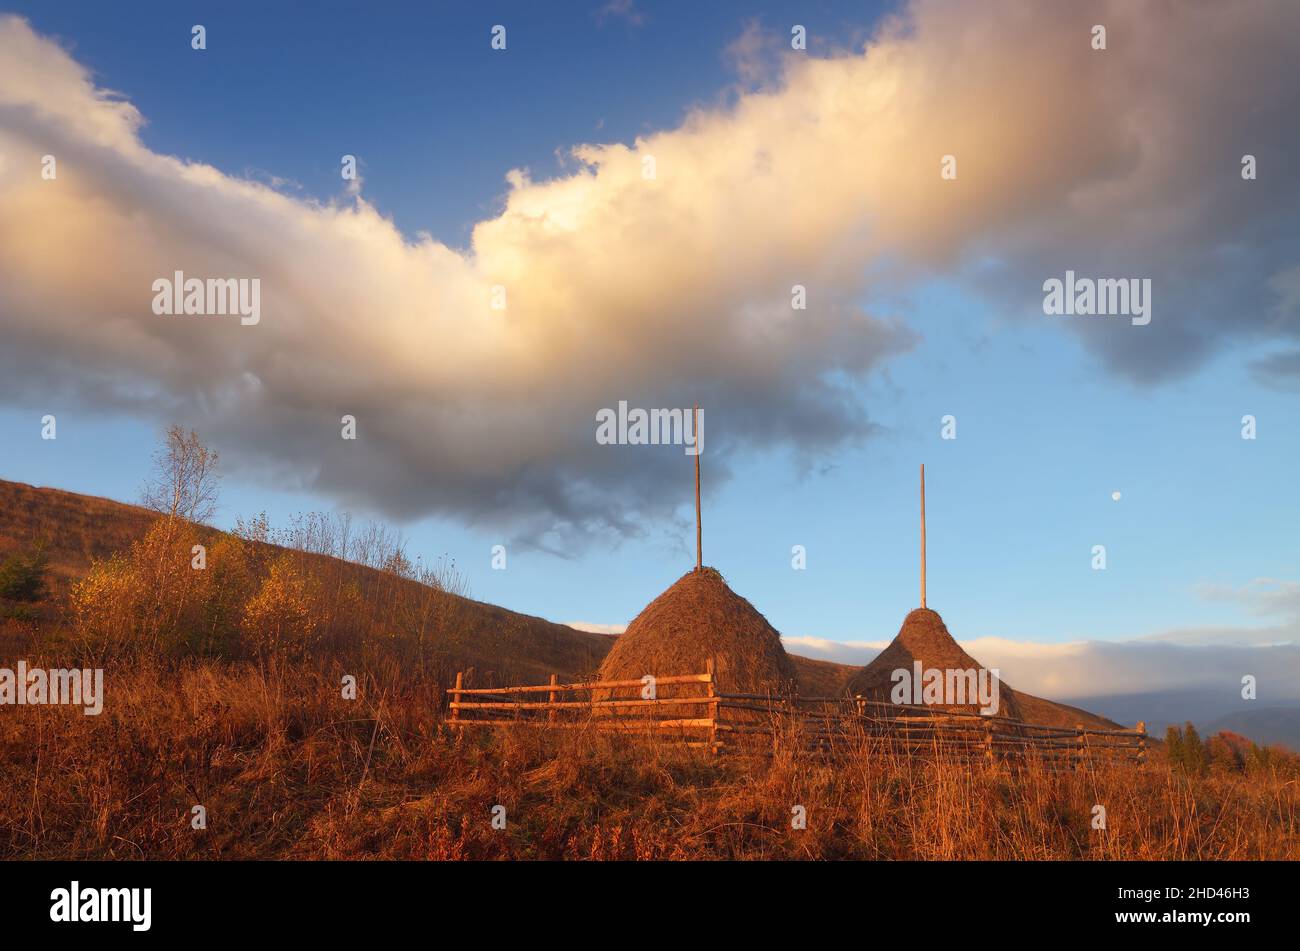 Autumn landscape in a mountain village. Two stack of dry hay. Beautiful evening clouds. Carpathian mountains, Ukraine, Europe Stock Photo